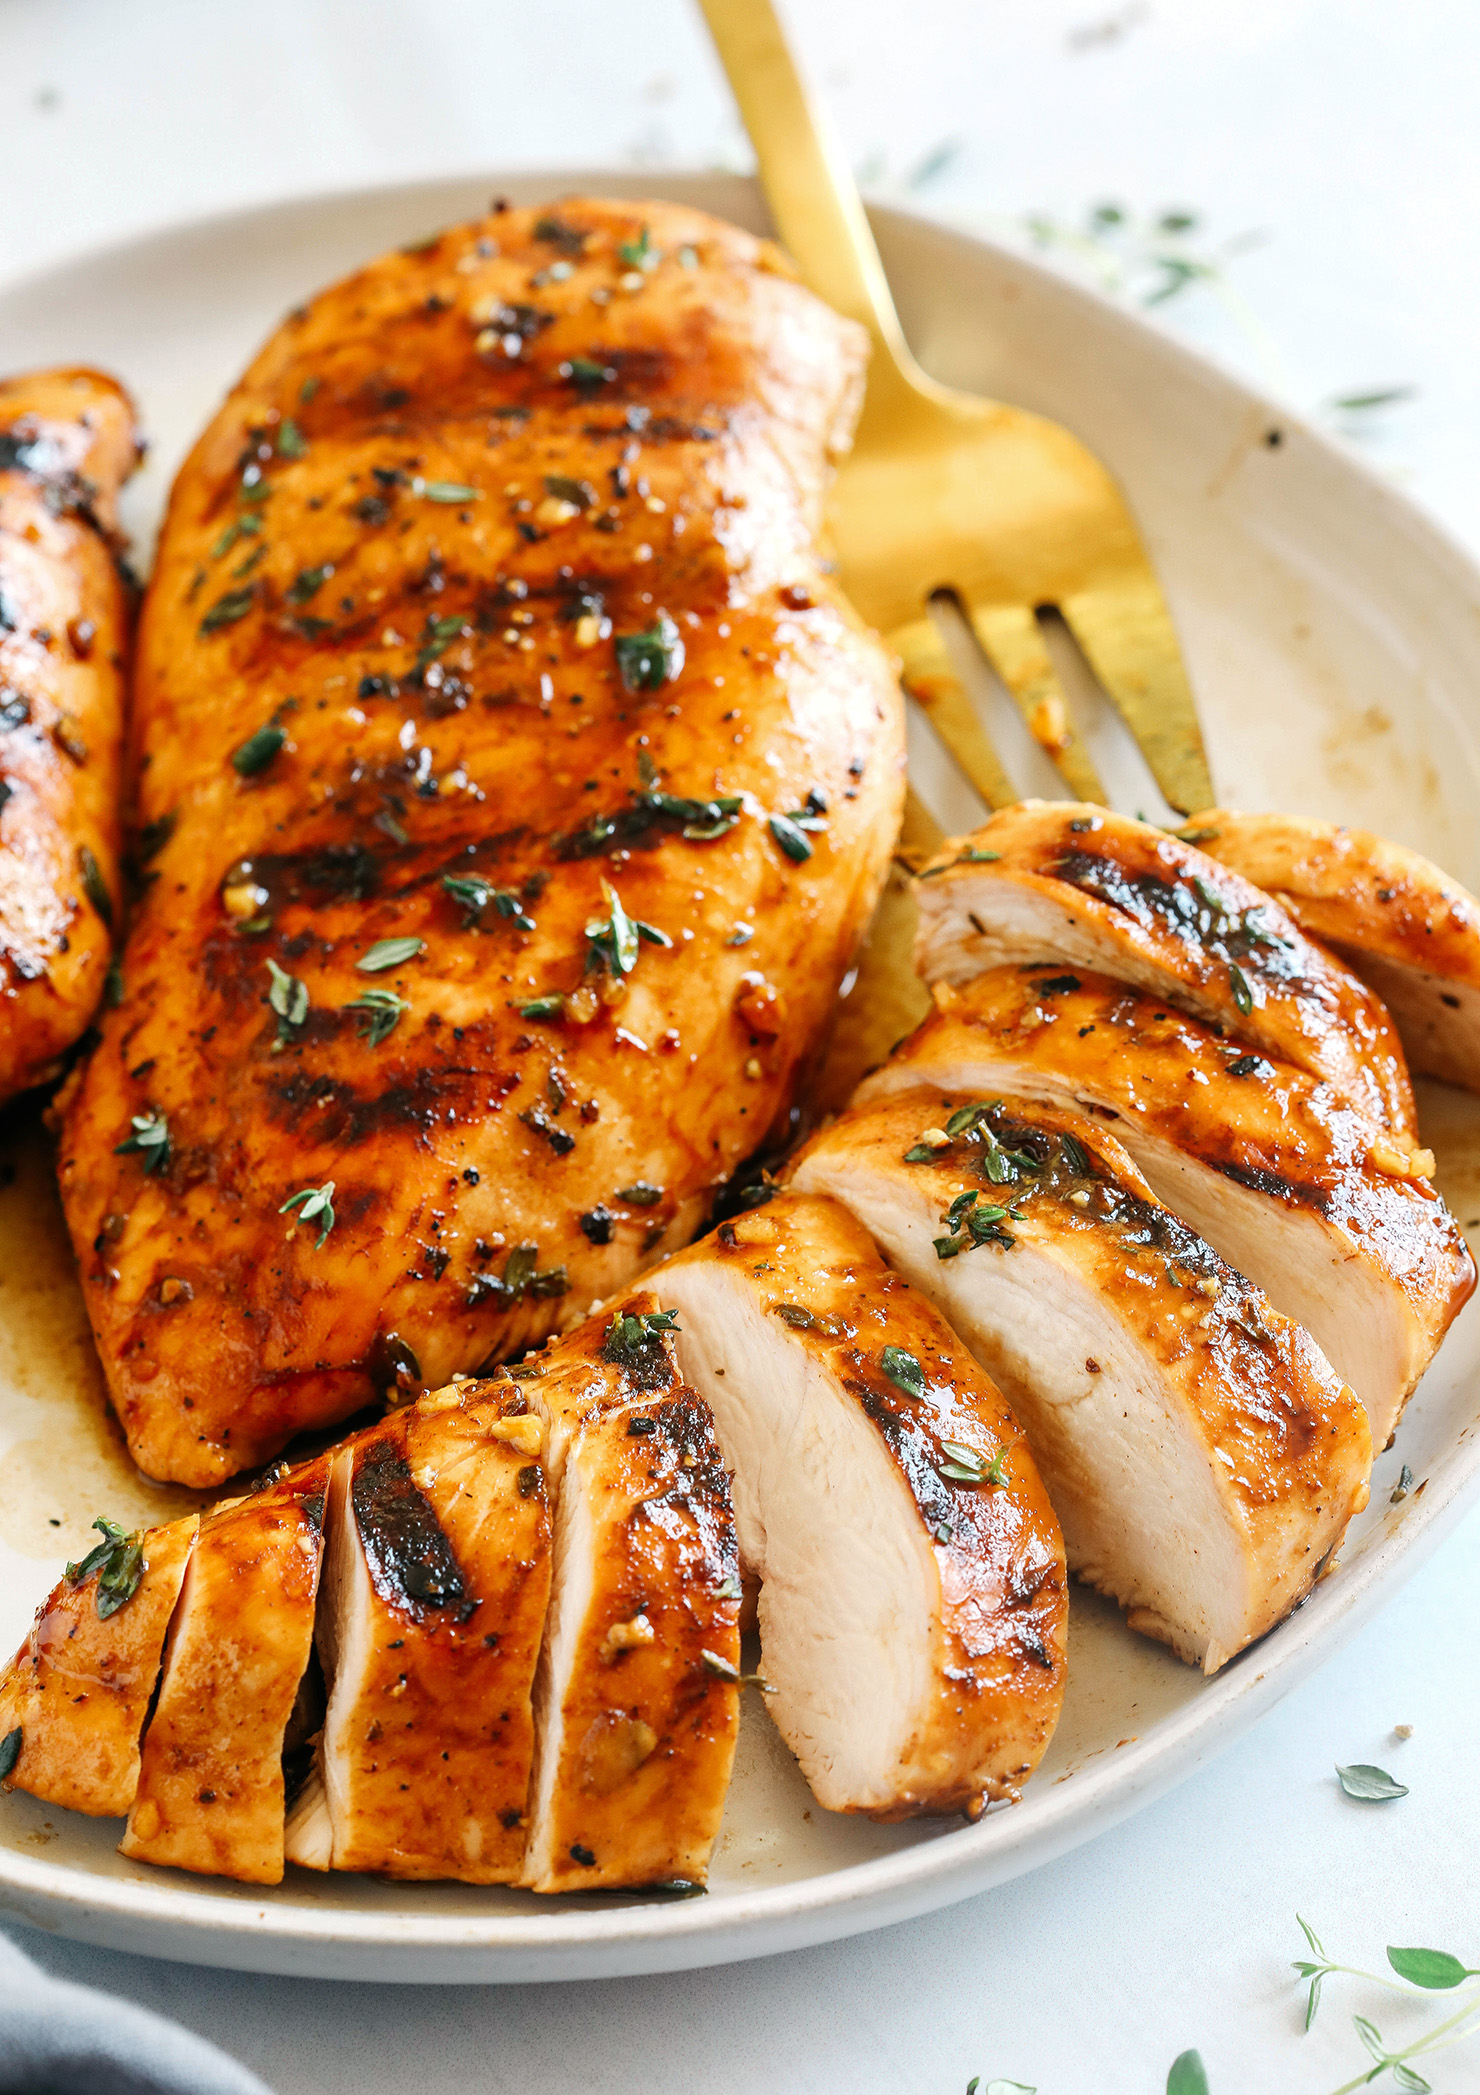 Moist and juicy chicken breasts marinated in a rich maple balsamic herb glaze, seasoned with fresh herbs, and grilled to perfection for a healthy weeknight meal!